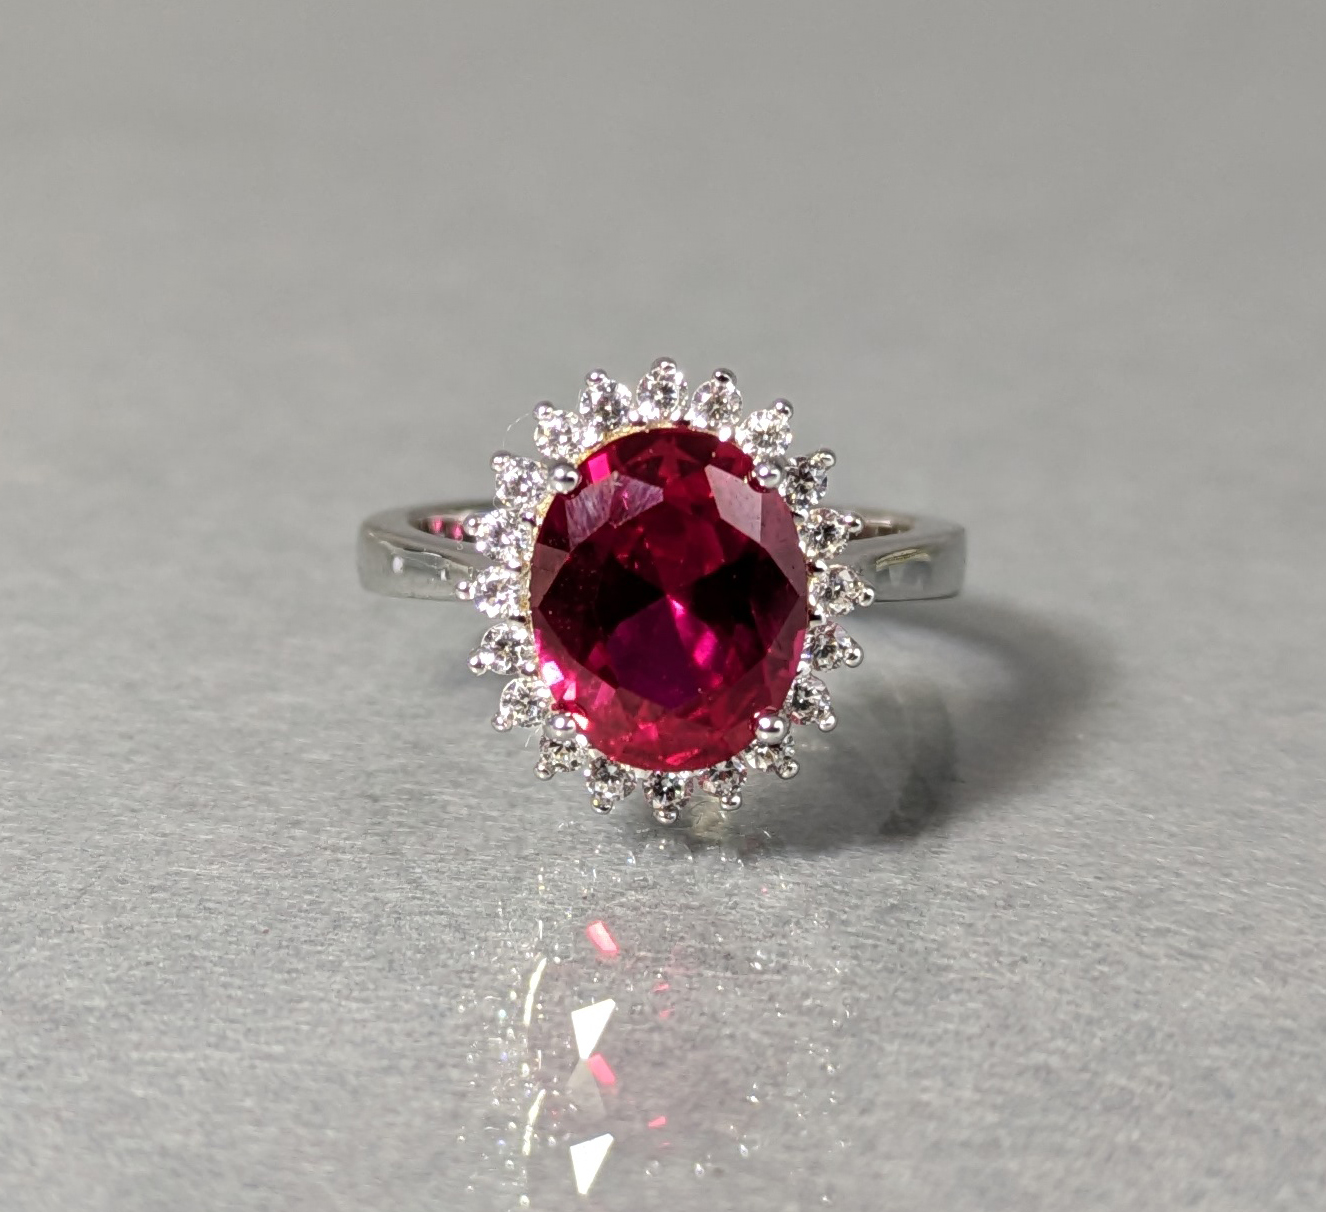 A dress ring set oval-cut cubic zirconium of deep red colour, within a border of small white stones,